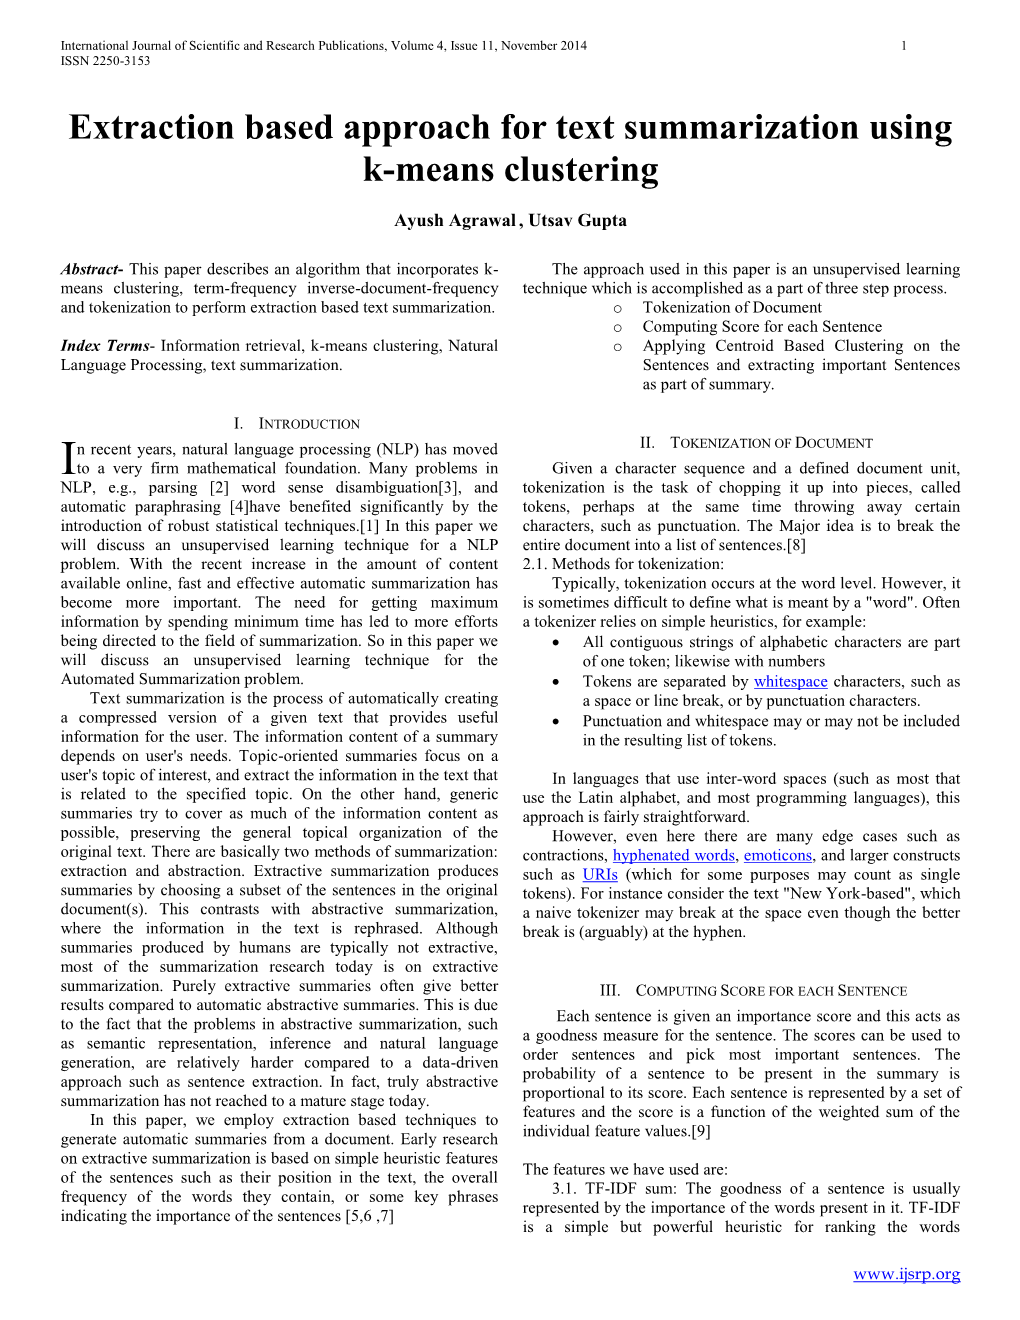 Extraction Based Approach for Text Summarization Using K-Means Clustering